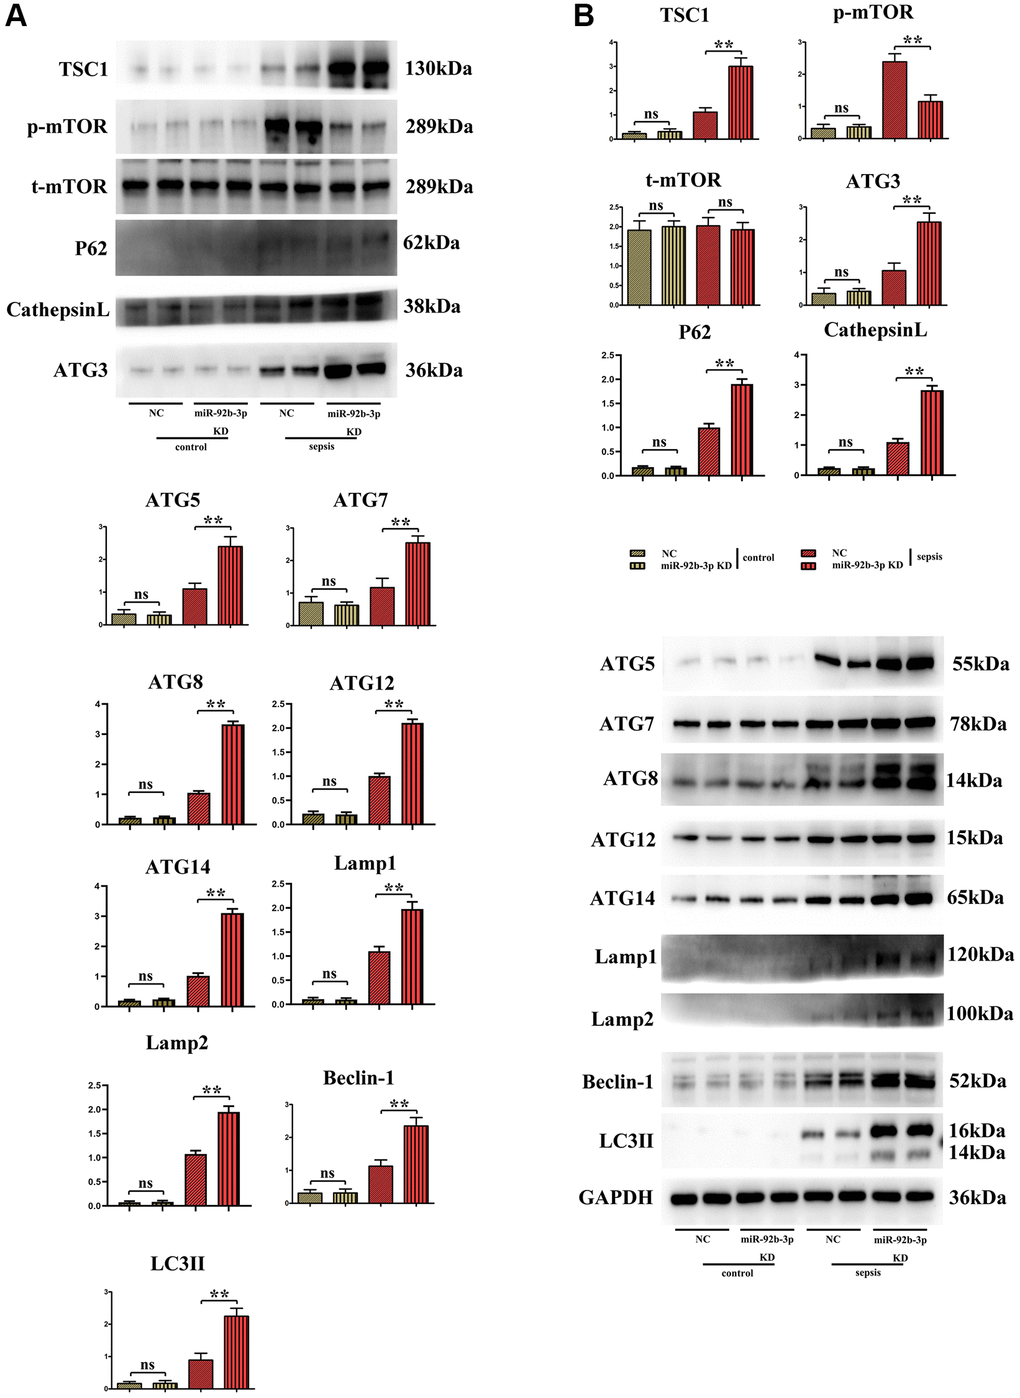 Expressions of autophagy/mTOR pathway-related proteins in mouse myocardium. (A) Relative expression of autophagy/mTOR pathway-related proteins in mouse myocardium; (B) Strip plot of autophagy/mTOR pathway-related proteins in mouse myocardium. **p p > 0.05.